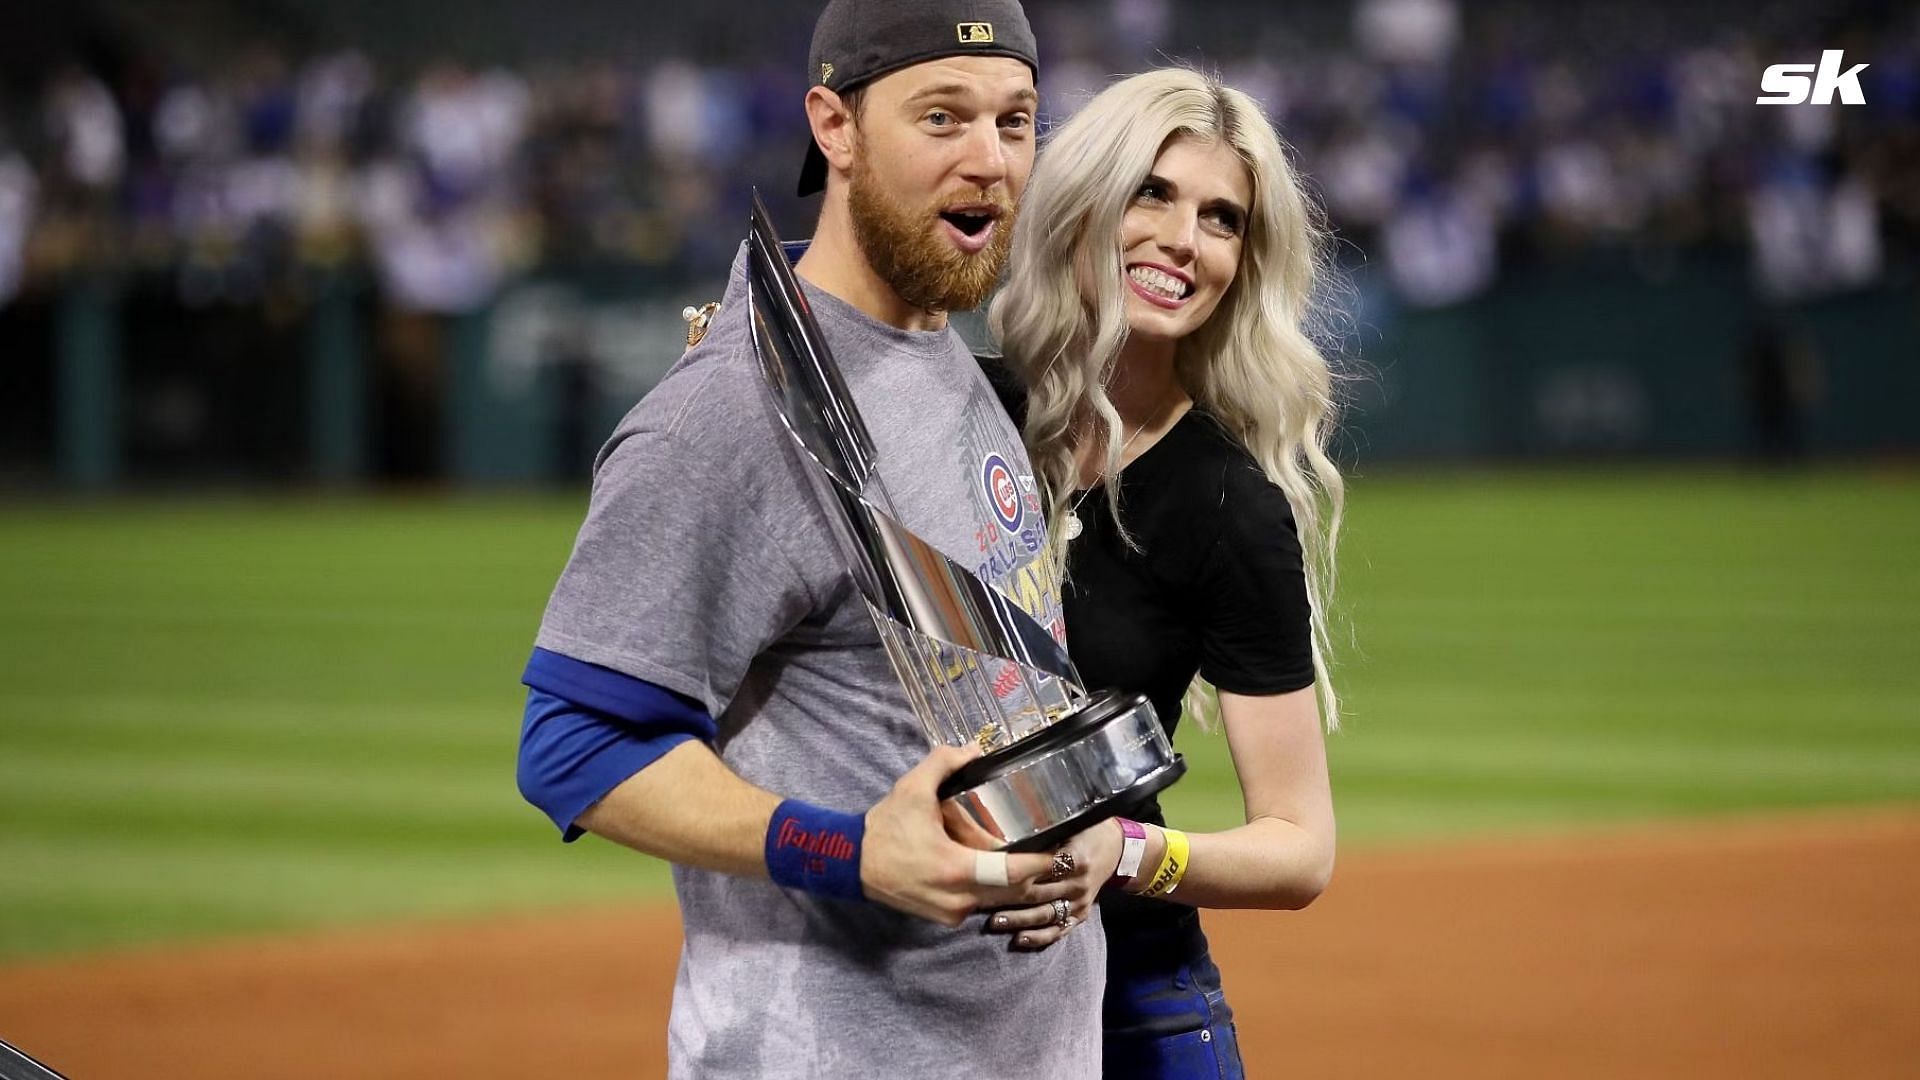 When 2X WS champion Ben Zobrist filed a lawsuit against his pastor alleging infidelity with the former outfielder